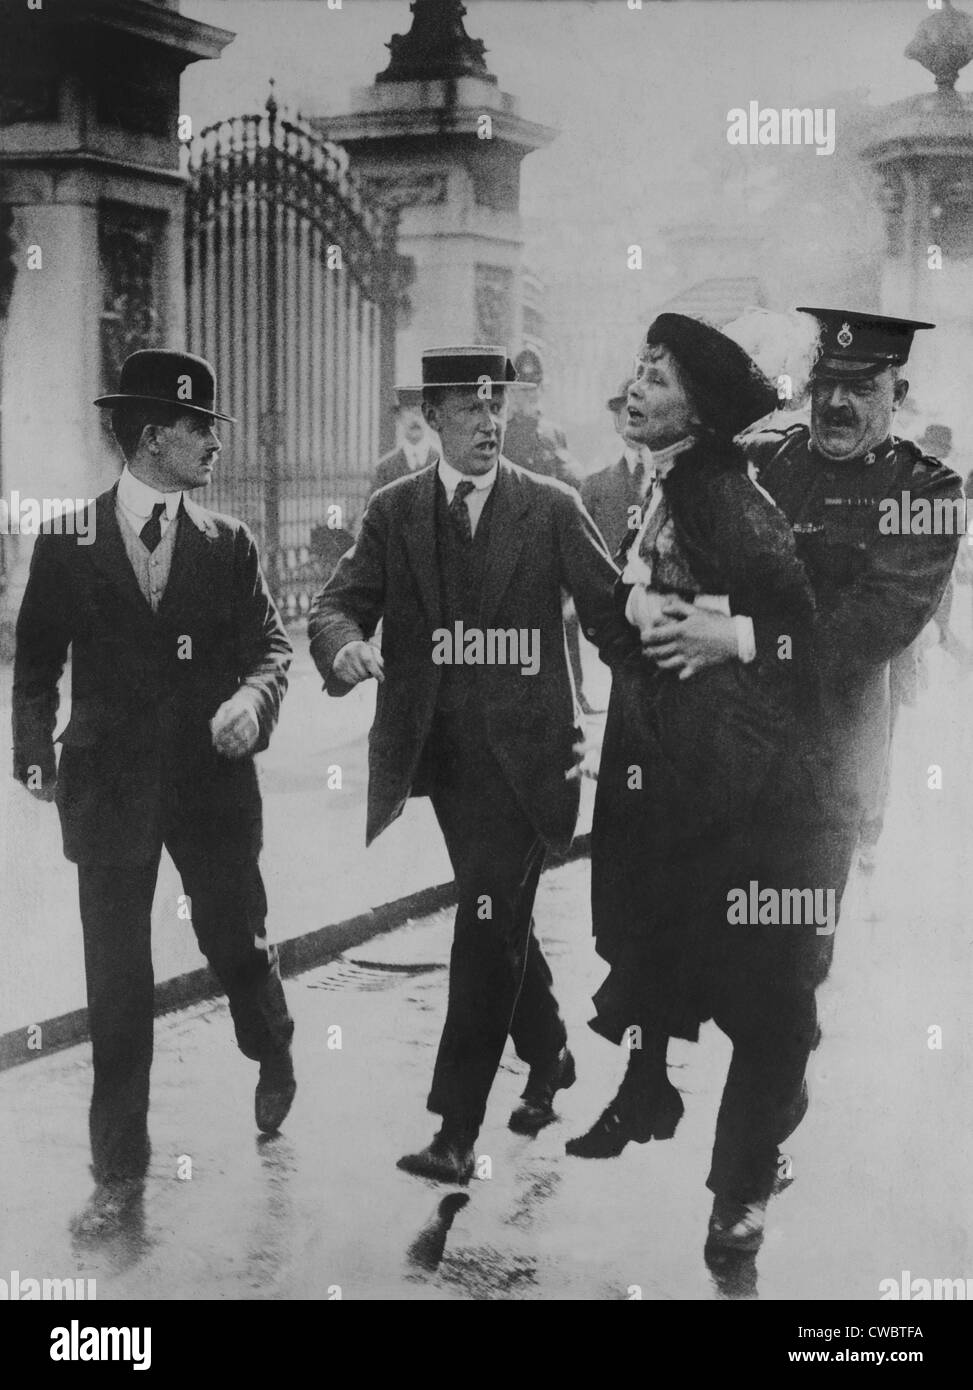 British suffragette Emmeline Pankhurst arrested and carried away by a policeman for leading suffragettes attempt to present a Stock Photo